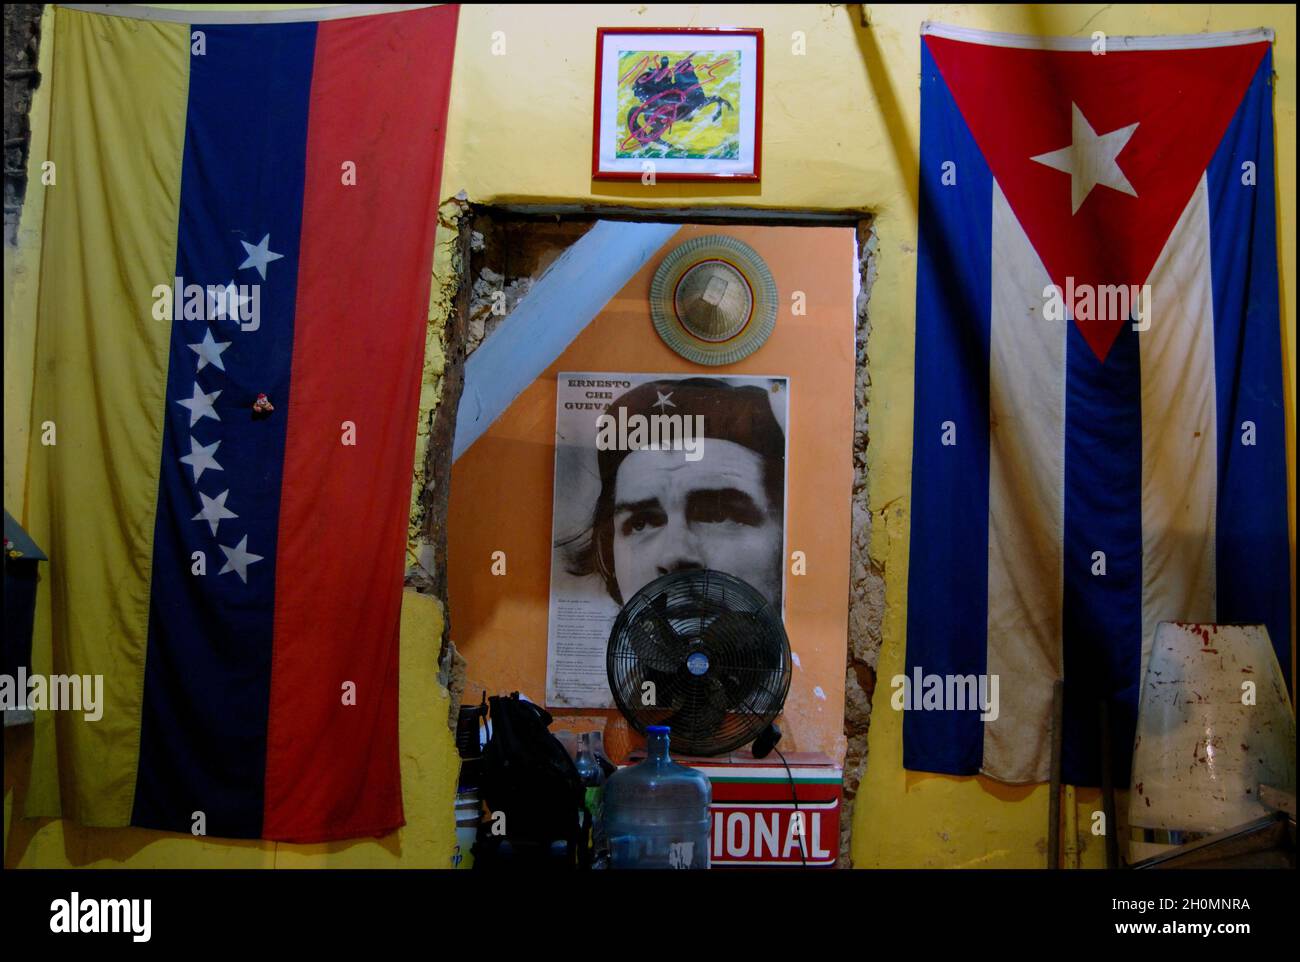 A poster of Marxist Revolutionary leader Che Guevara in between the flags of Cuba and Venezuela at a home in Venezuela. 2008. Stock Photo